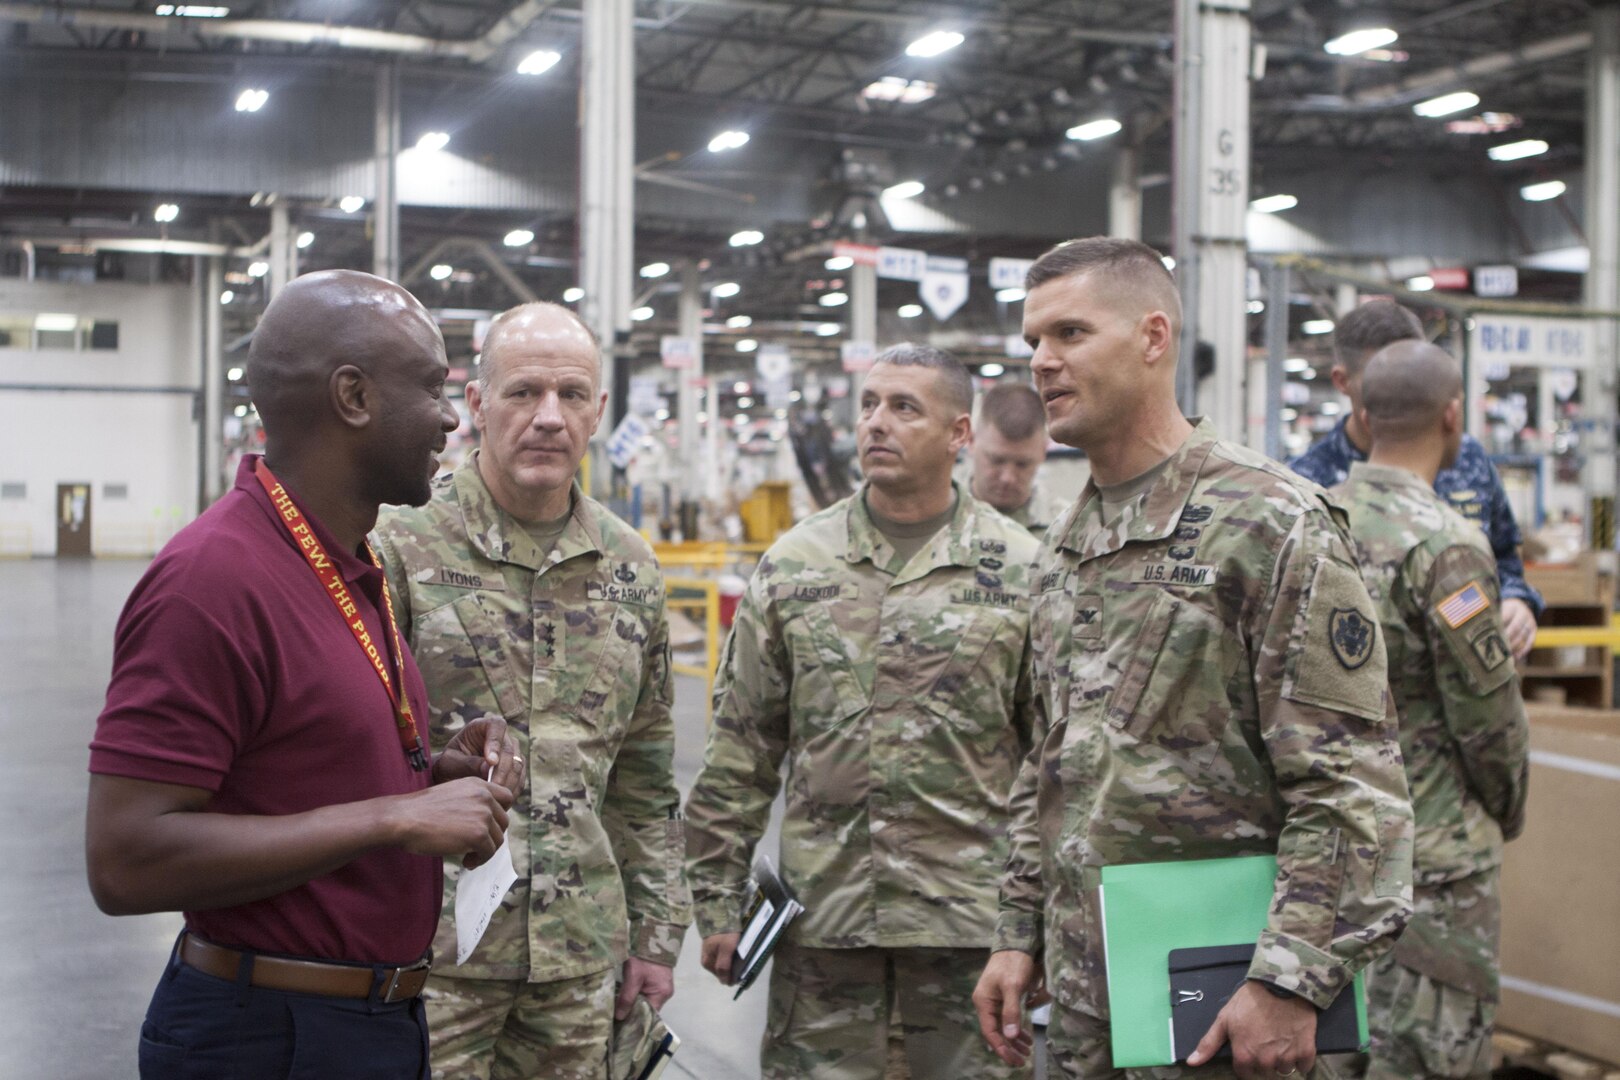 Joint Chiefs Director of Logistics visits Distribution headquarters, discusses future capabilities